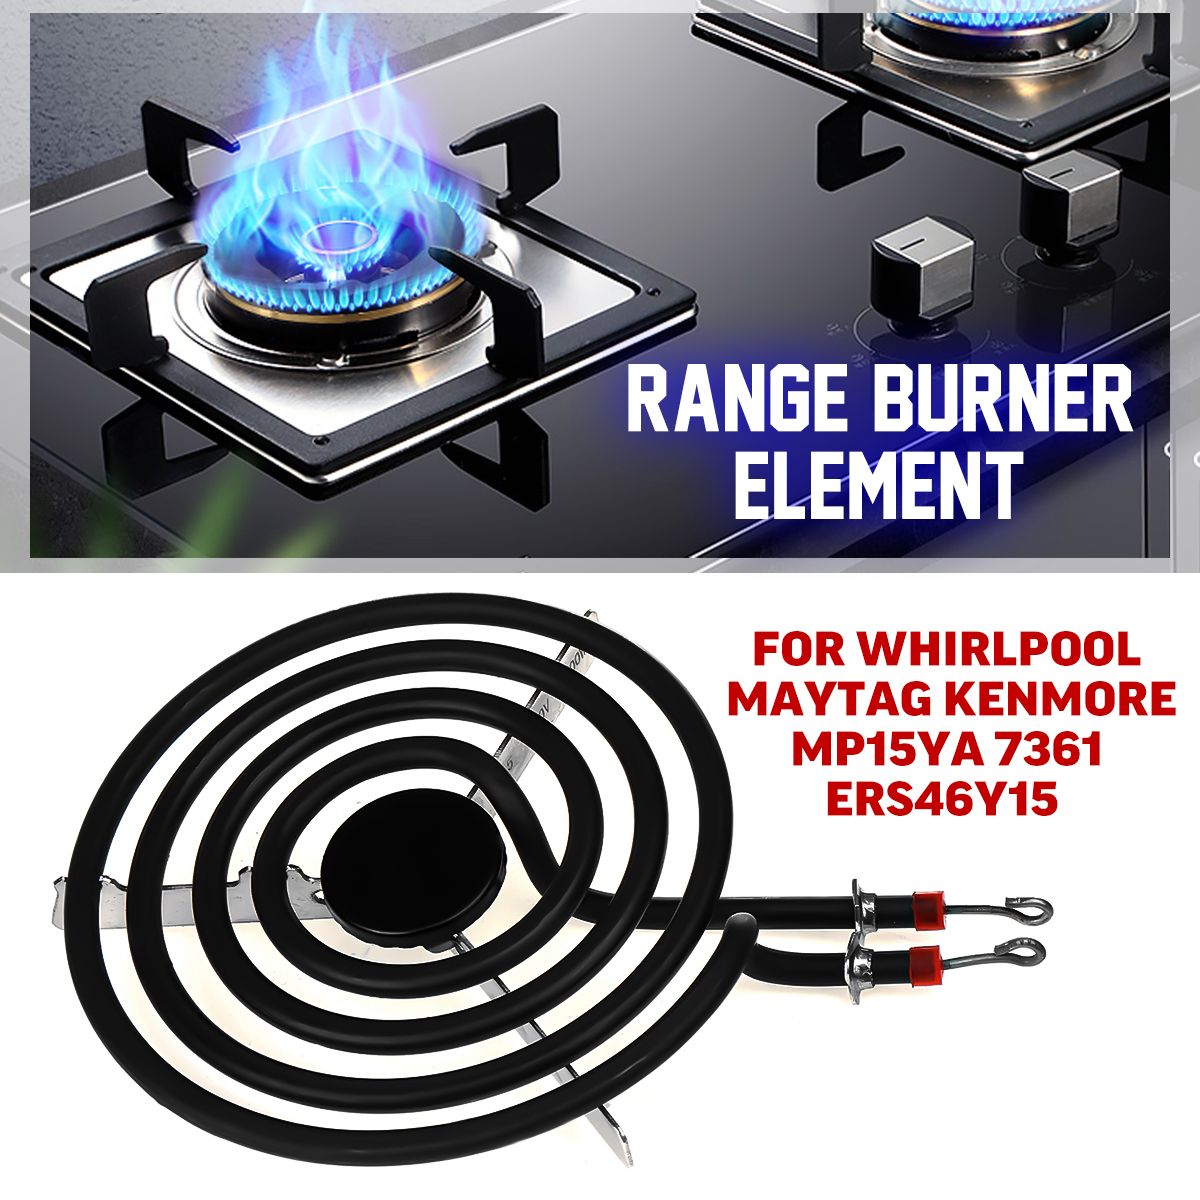 ERS46Y15-7361-Range-Cooktop-Stove-6-Inch-Surface-Burner-Element-For-Whirlpool-Maytag-Cartridge-Heate-1617934